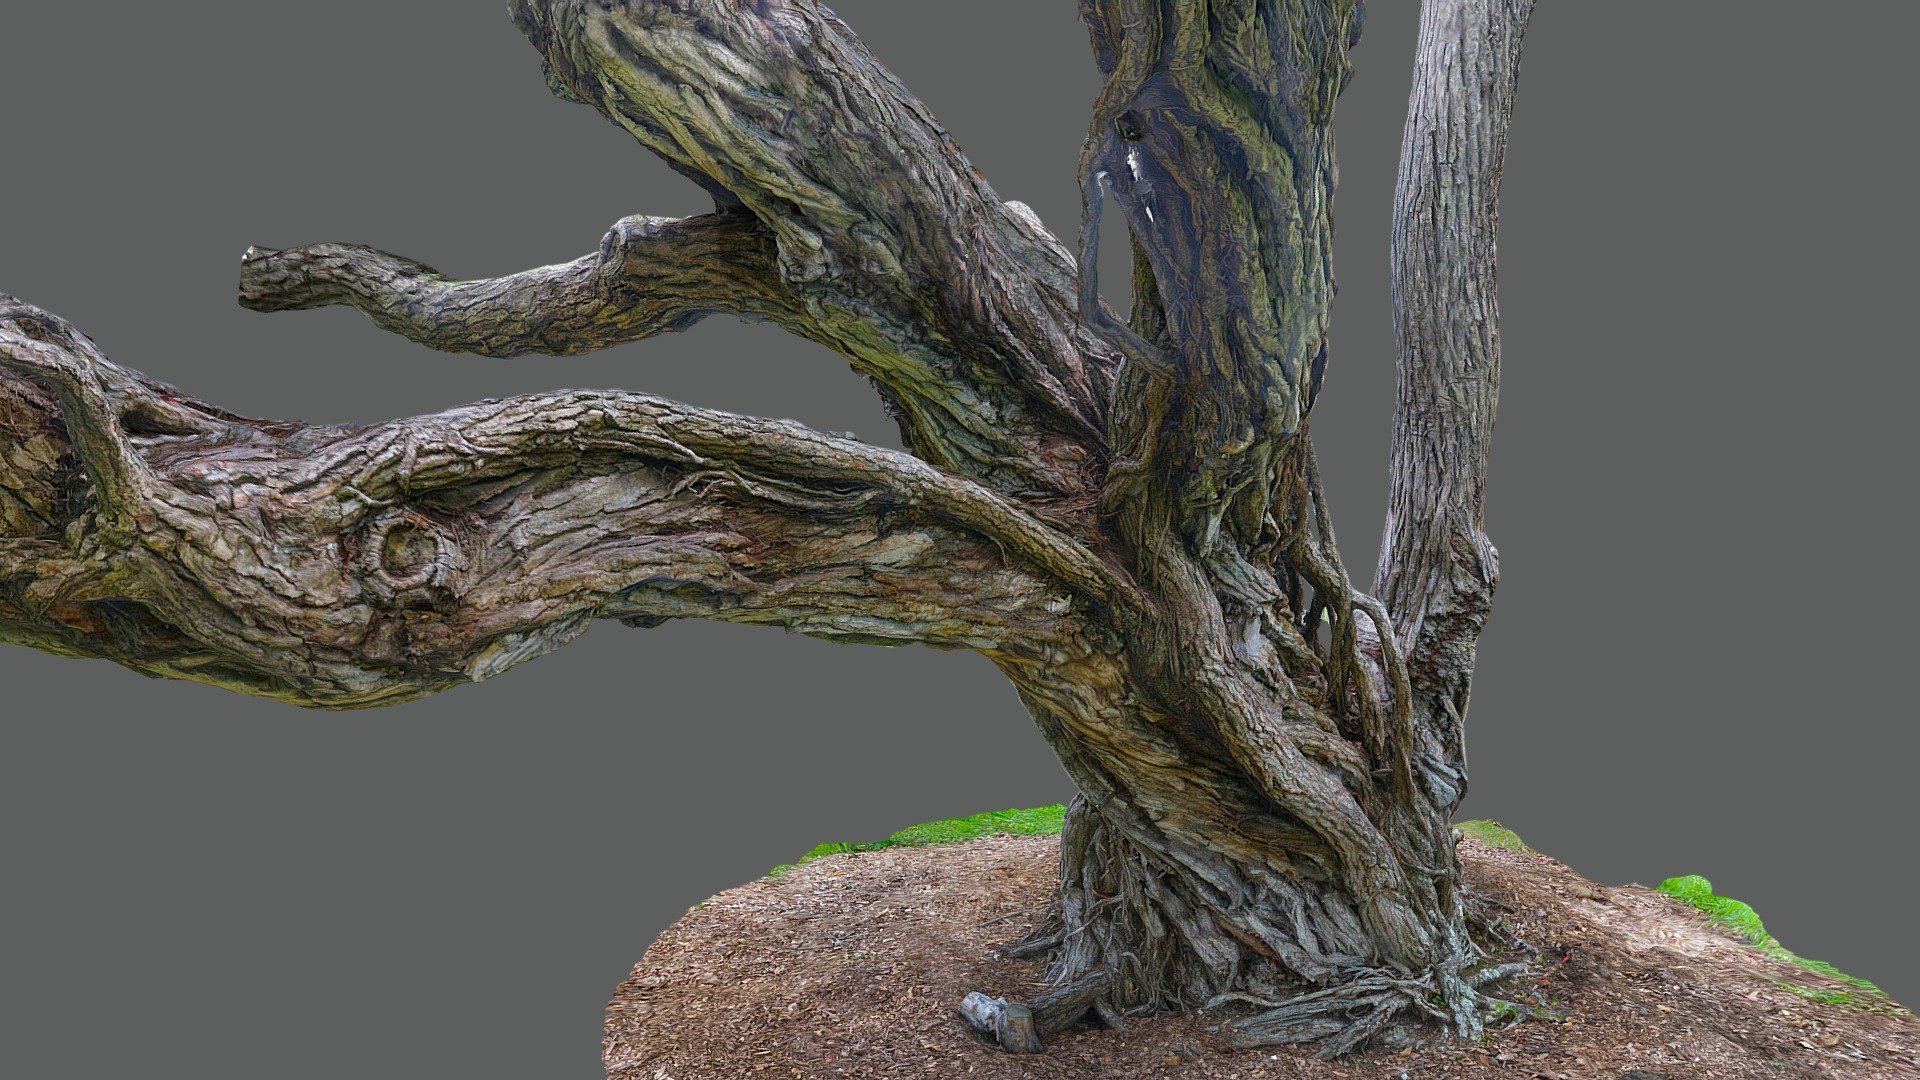 The base of an old tree with curving branches and aerial roots, rescanned with more photos to get more detail than the previous version. Wenderholm, Auckland, New Zealand. My 3D asset generated with photogrammetry software 3DF Zephyr v6.505 processing 388 images - Pohutukawa tree 8 rescan - Download Free 3D model by b_nealie 3d model